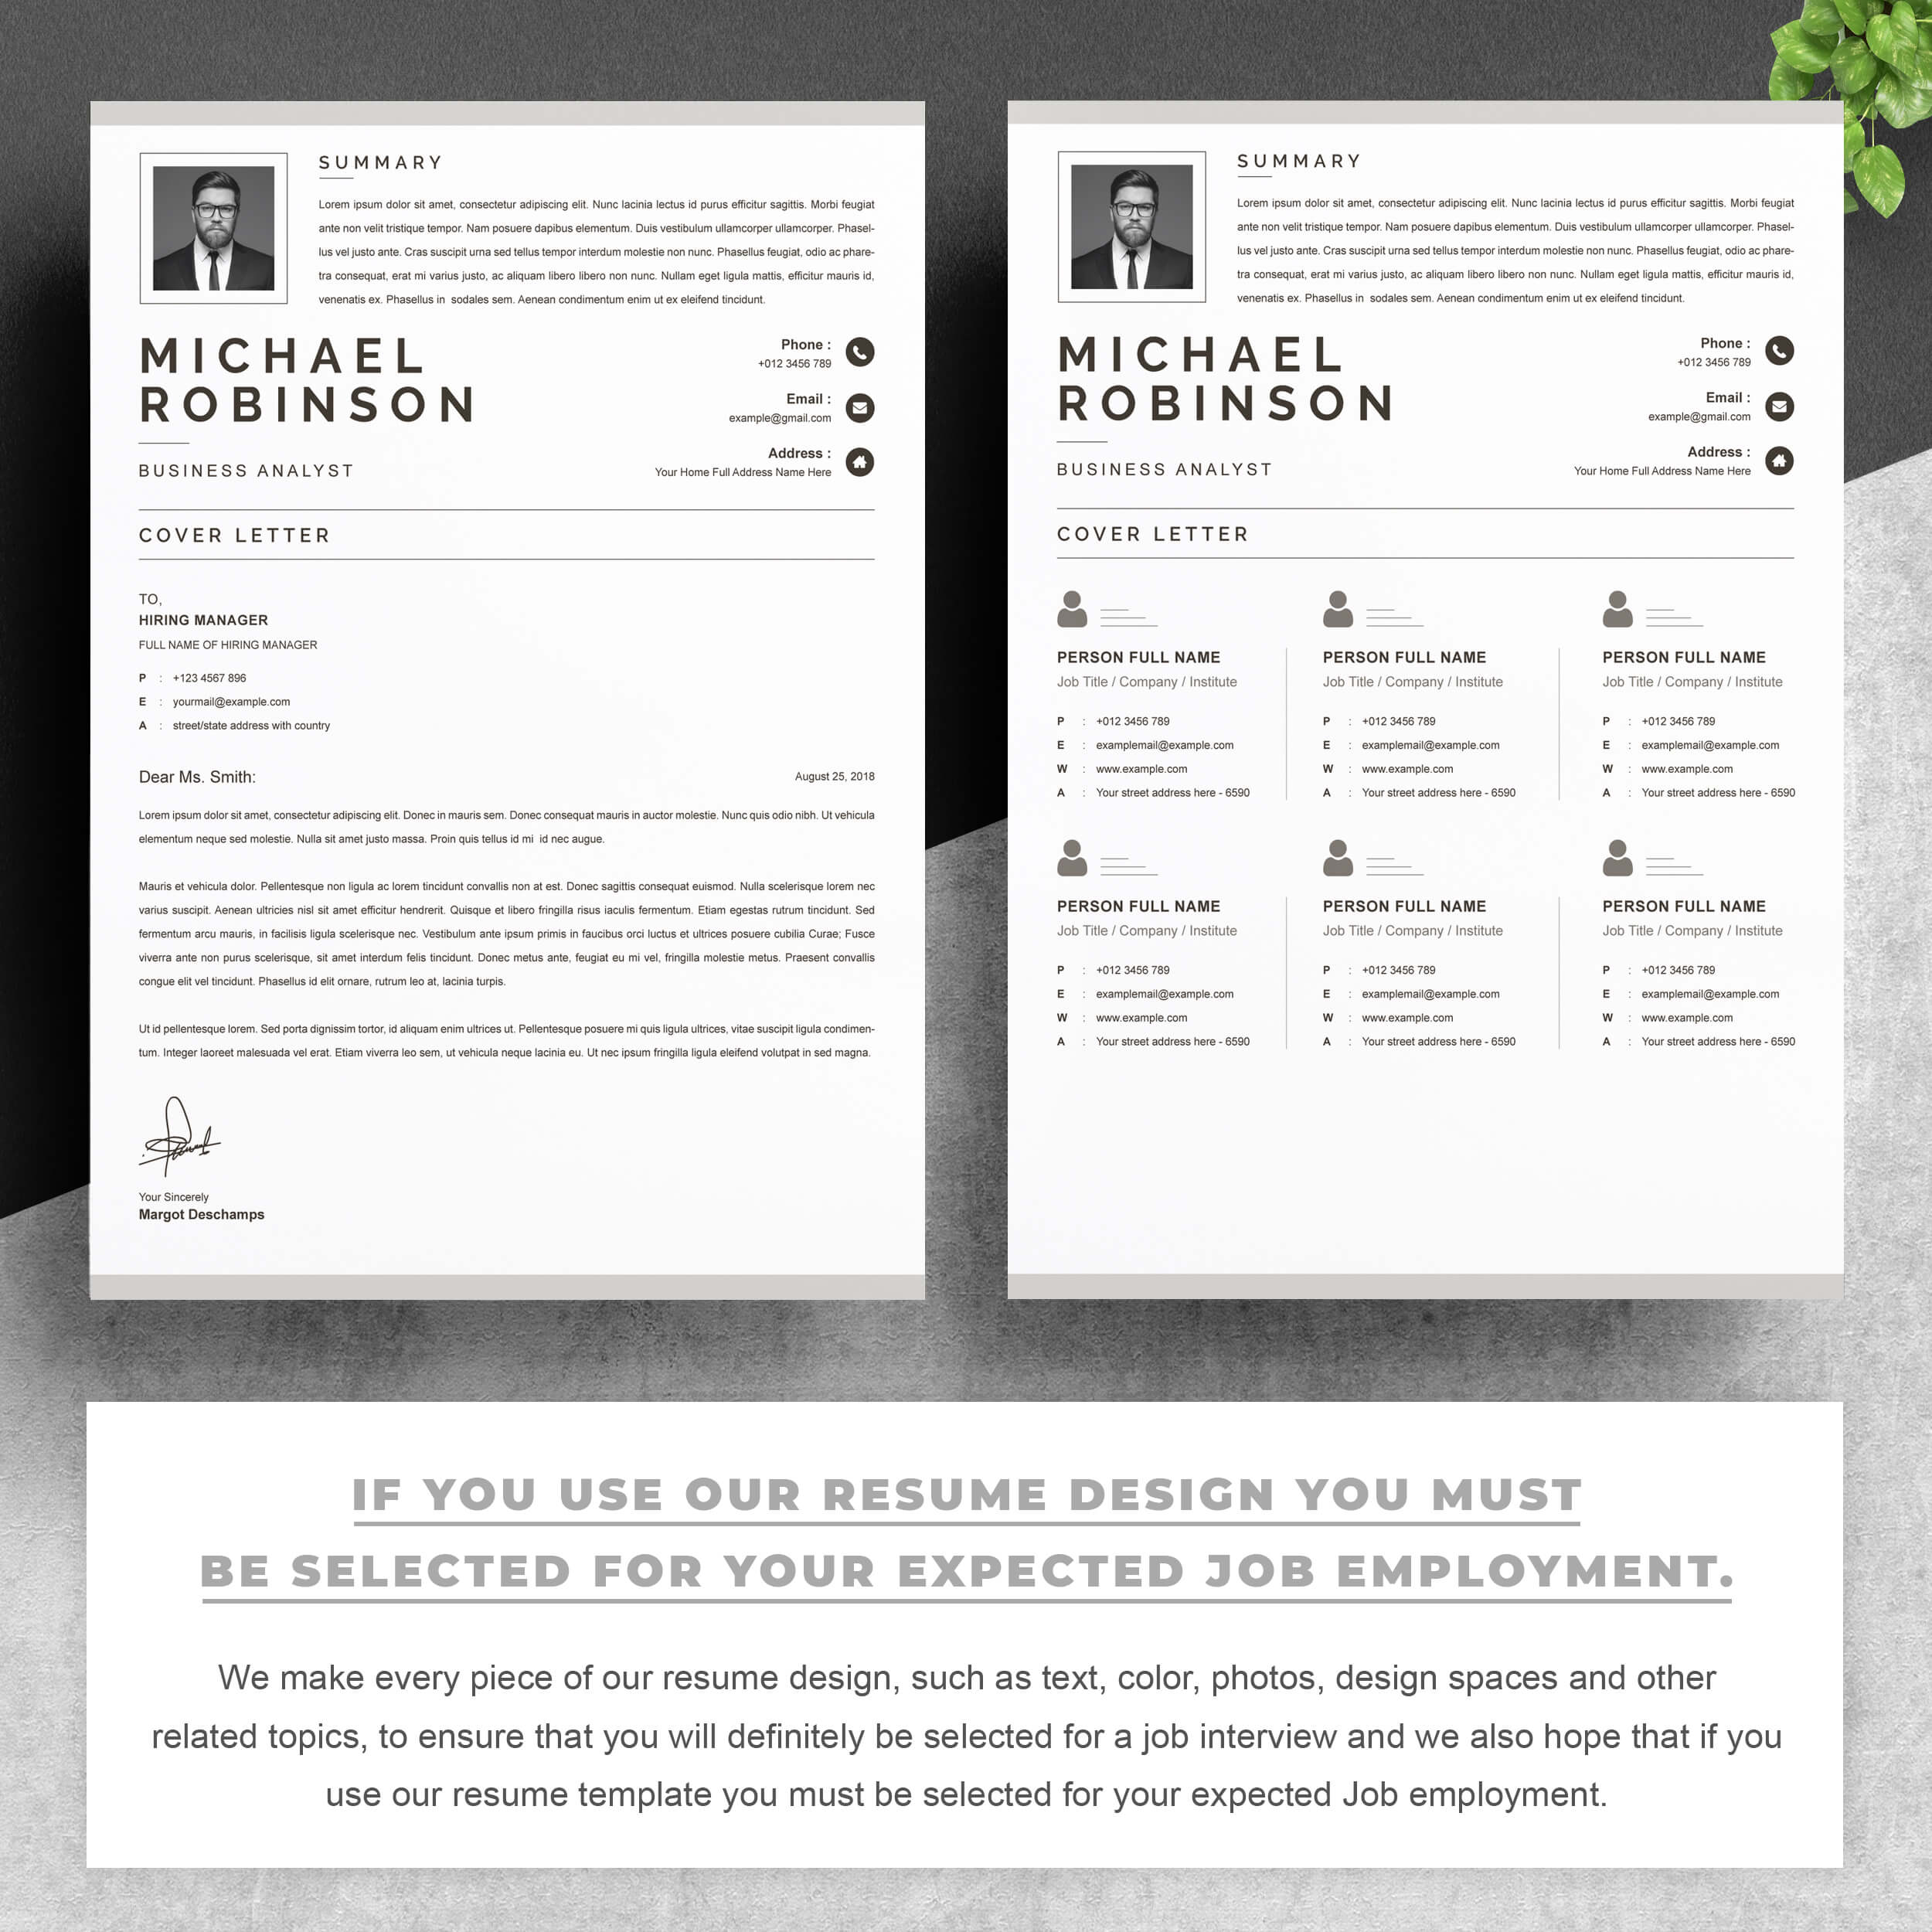 03 2 pages free resume design template copy 1 567